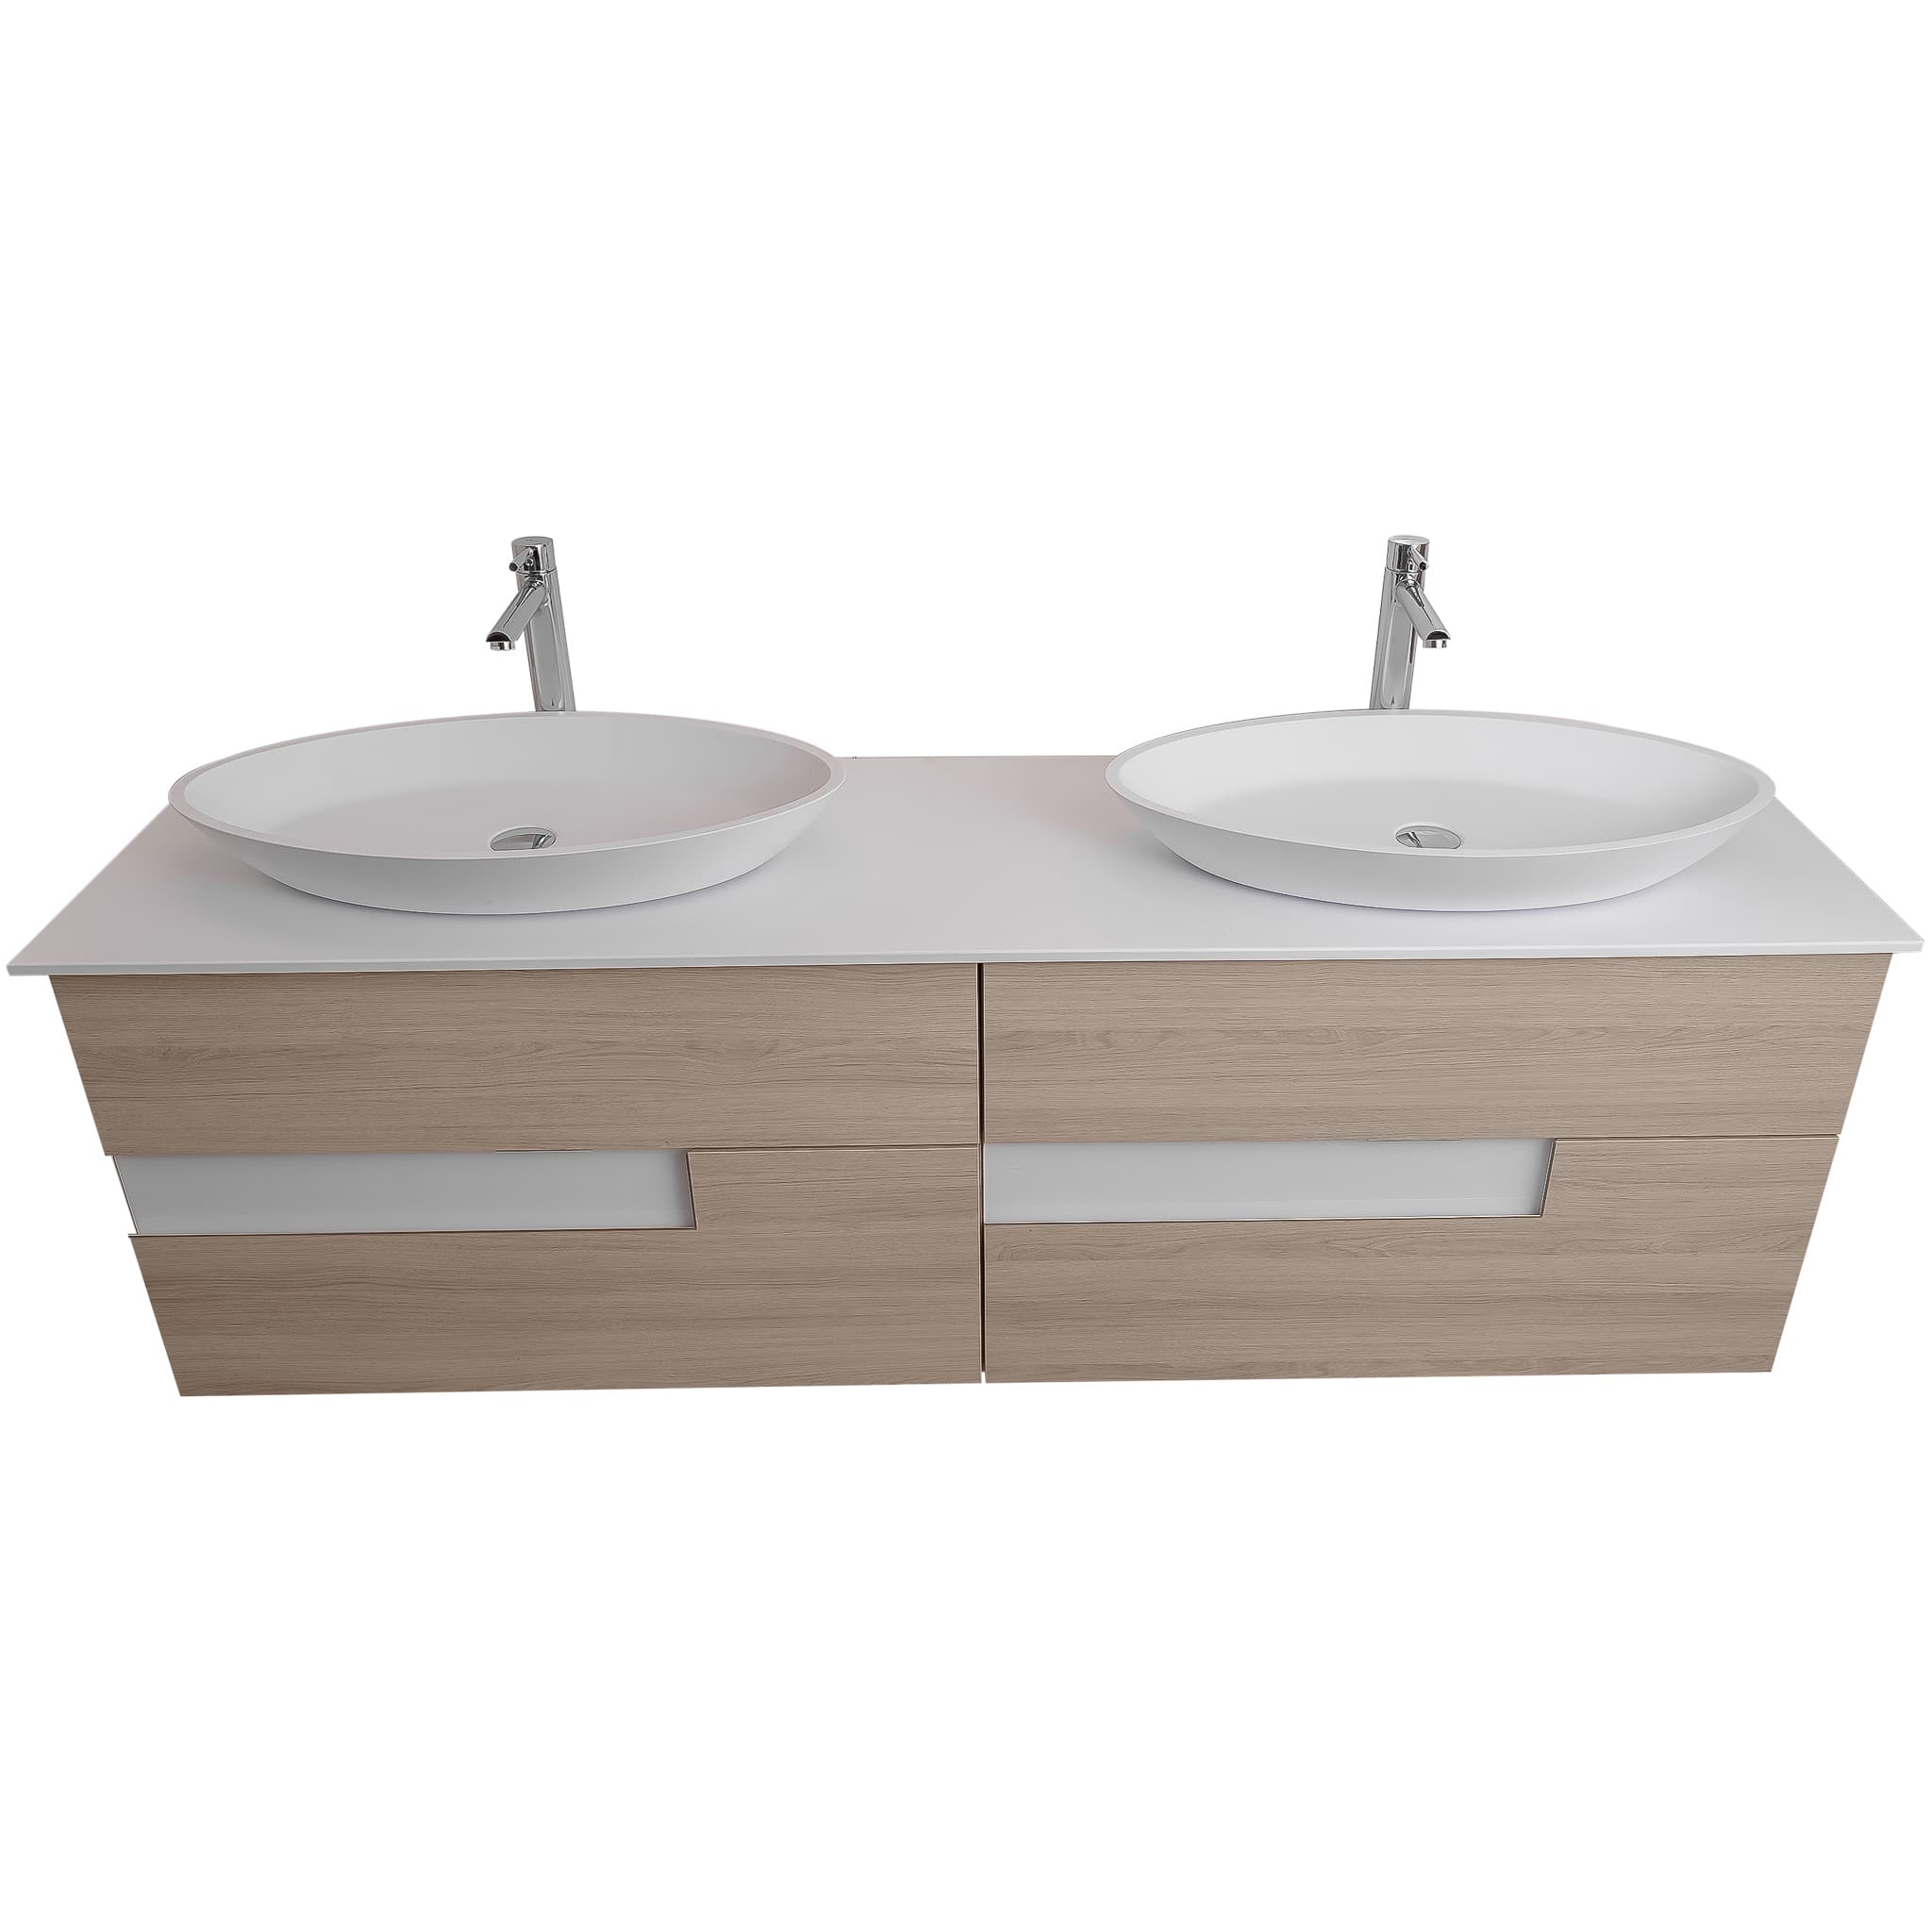 Vision 72 Natural Light Wood Cabinet, Solid Surface Flat White Counter And Two Oval Solid Surface White Basin 1305, Wall Mounted Modern Vanity Set